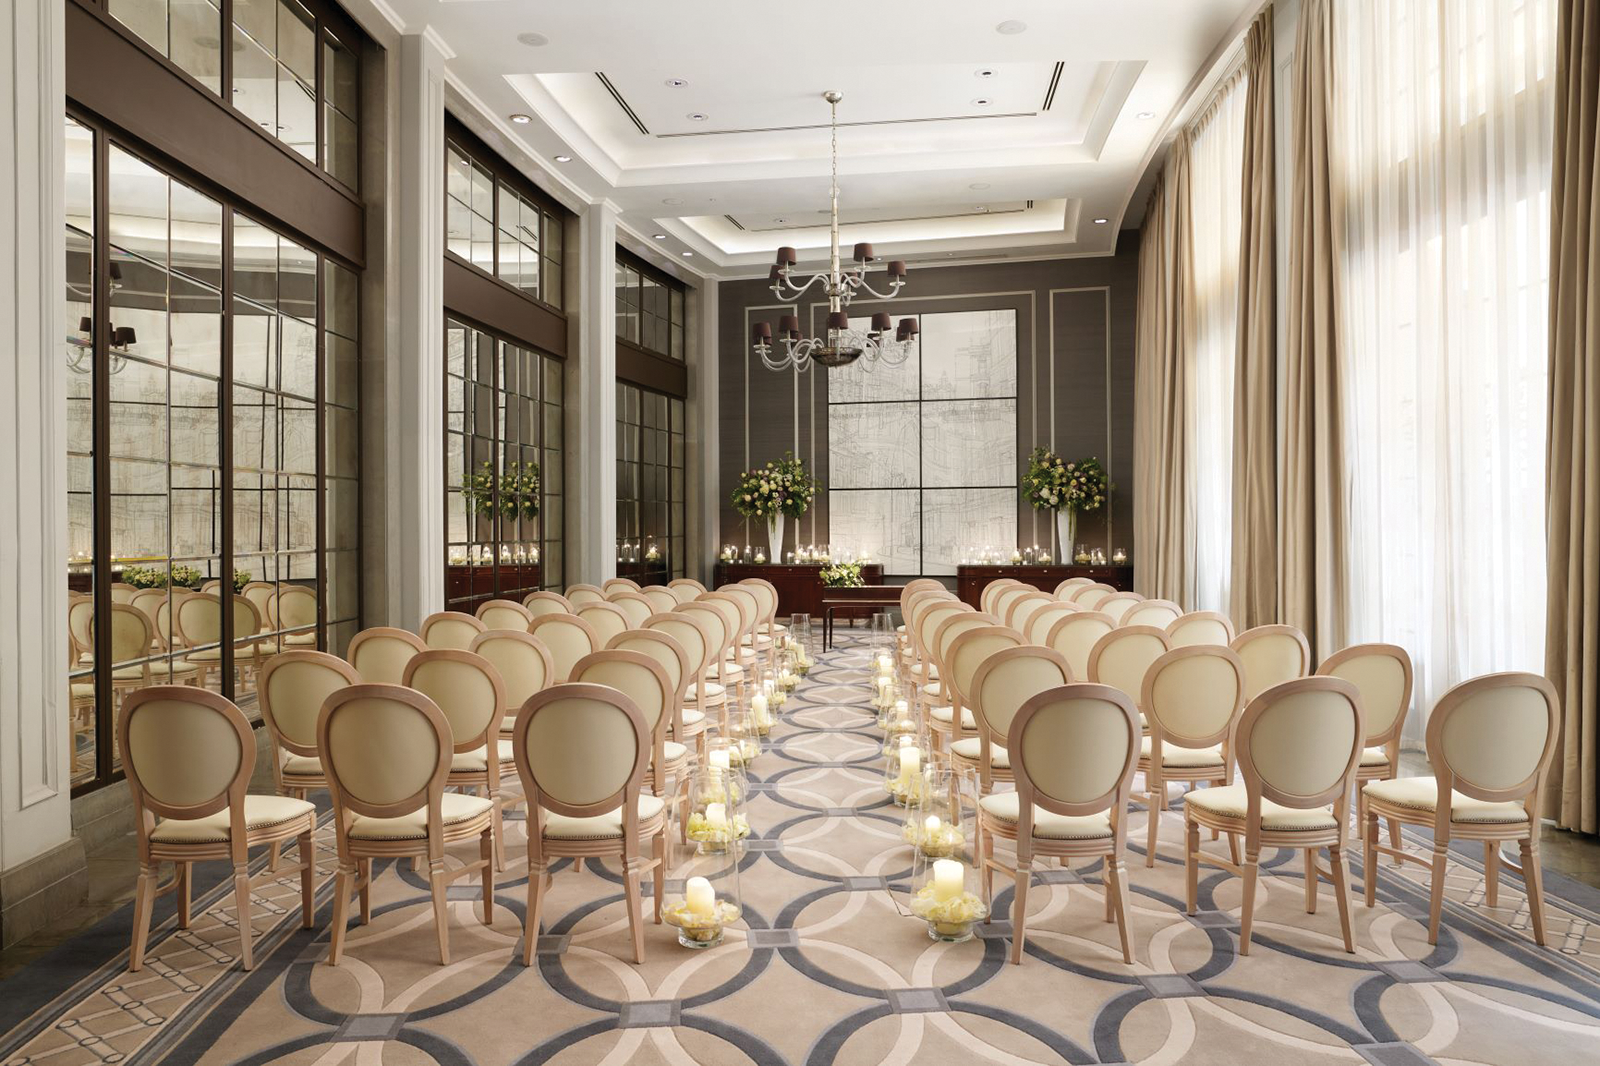 wedding spaces range from the intimate, elegant setting of the Nelson room and the chic surroundings of the Courtroom